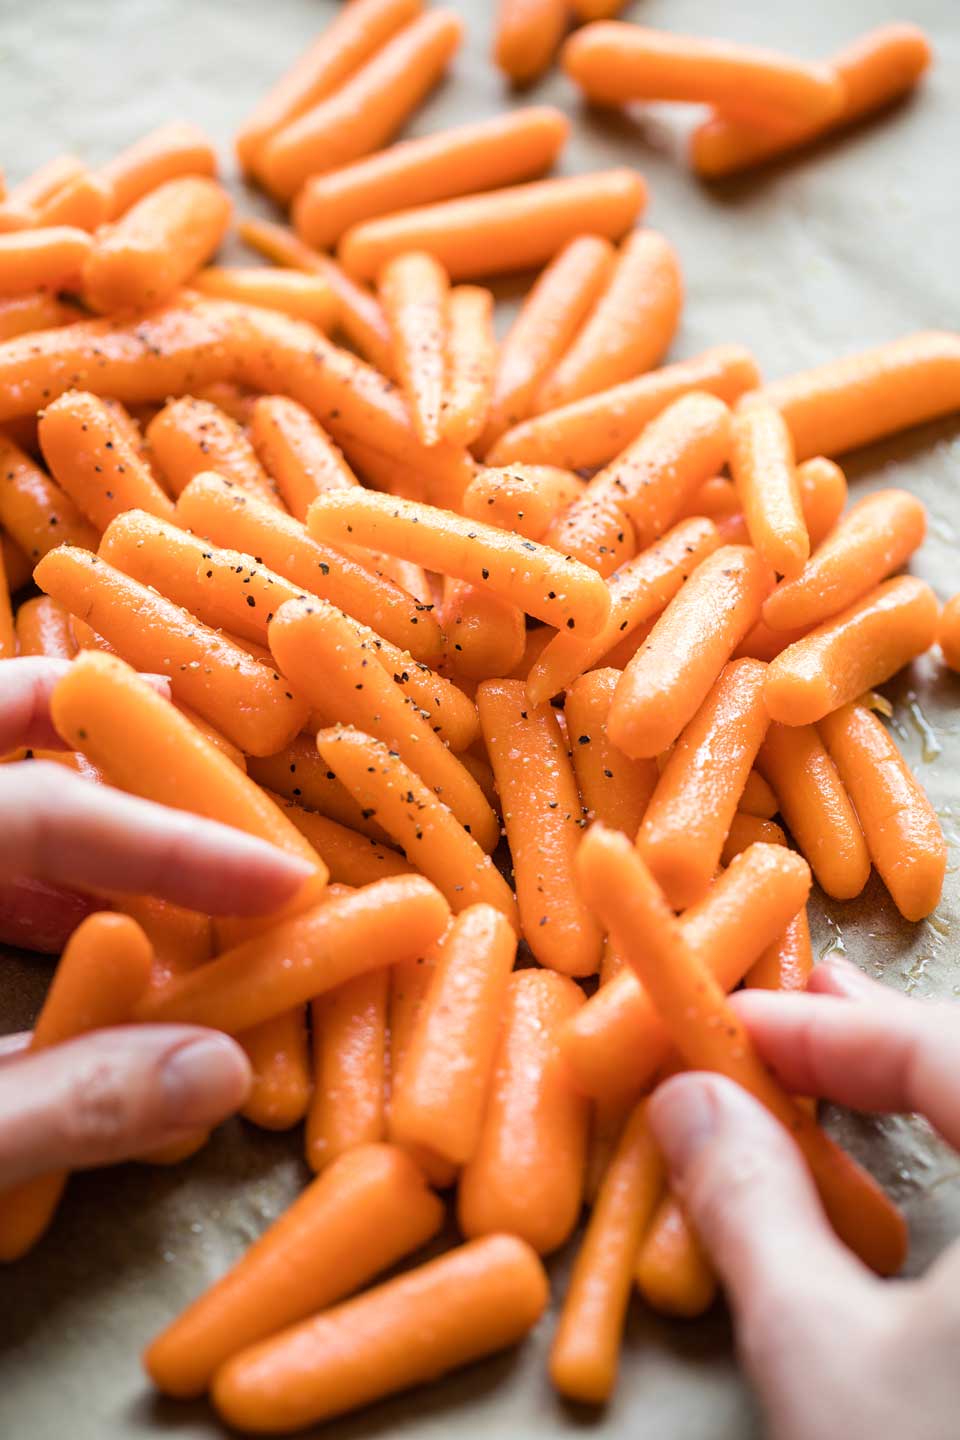 Two hands tossing raw baby carrots with oil and seasonings on a parchment-lined baking sheet before roasting in the oven.